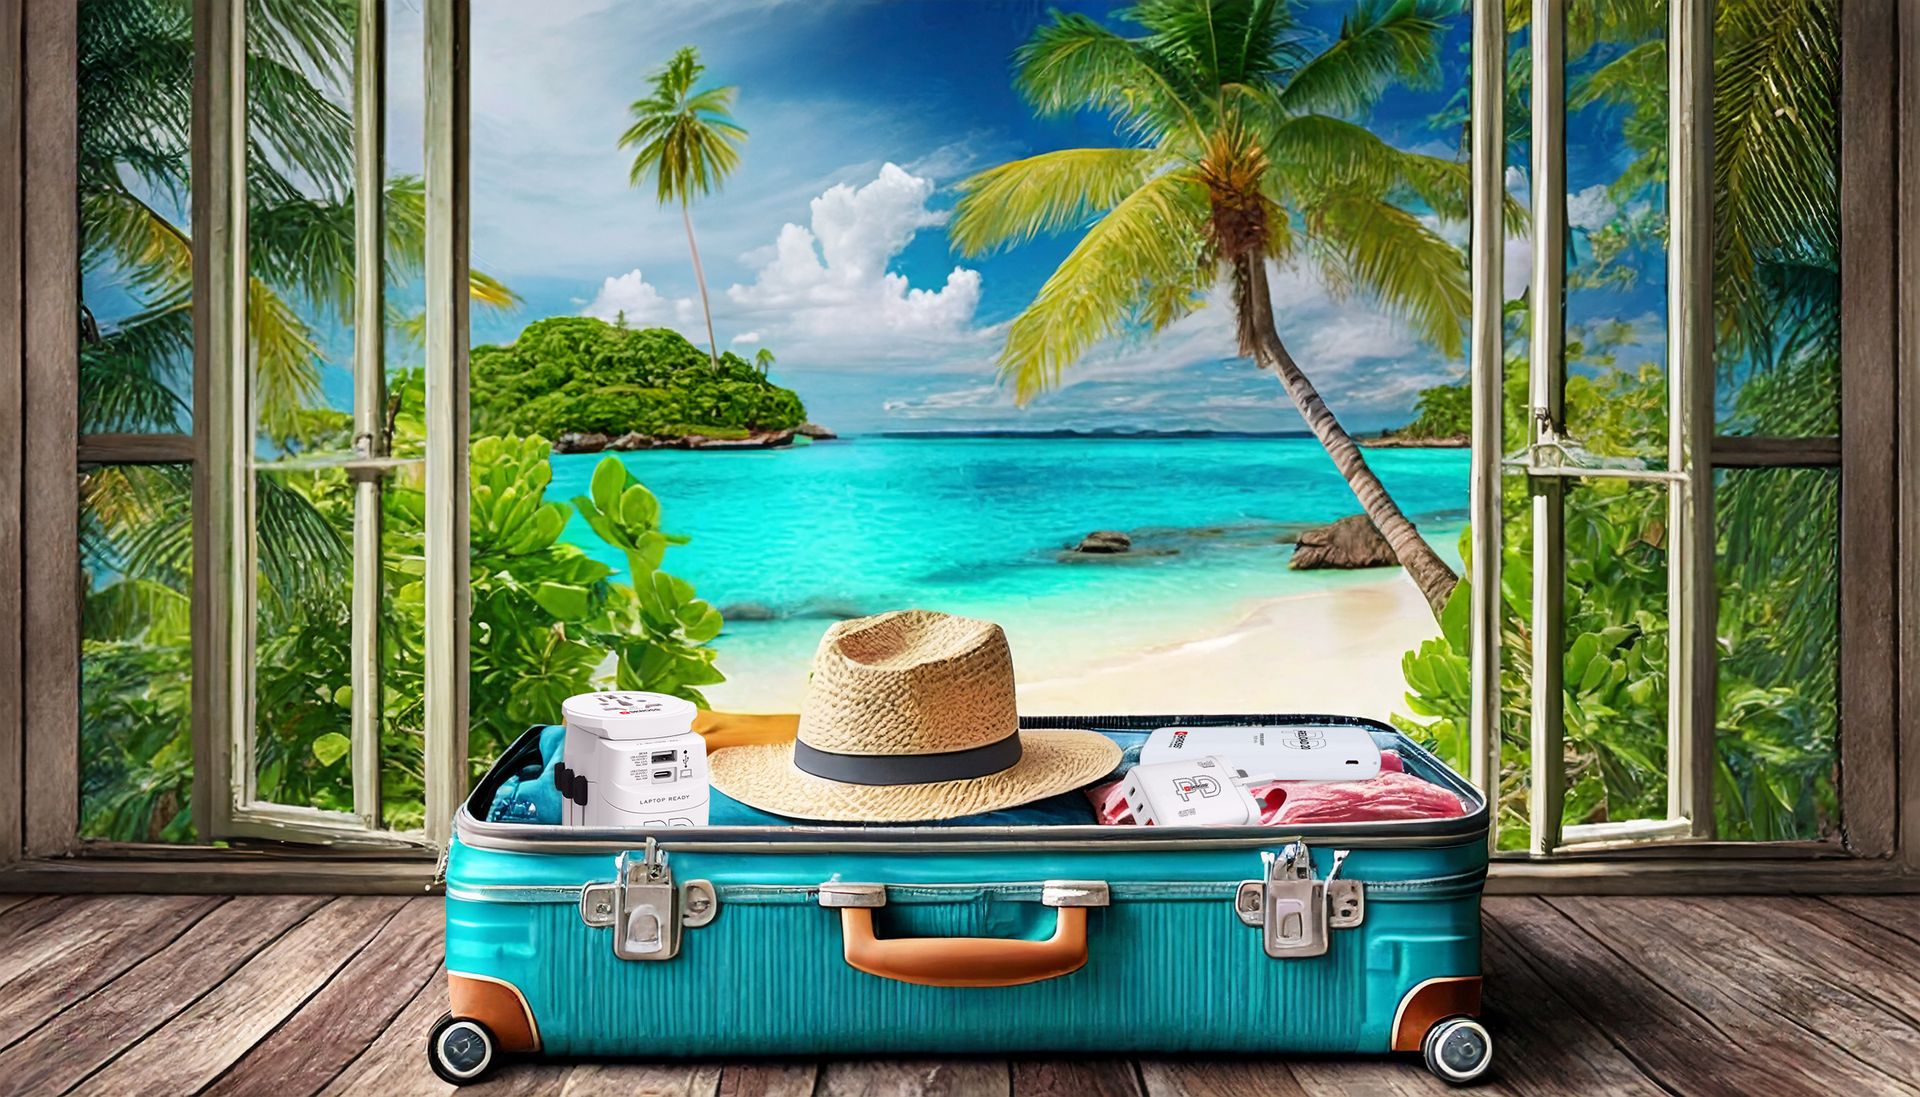 A blue suitcase with travel adapters, clothes and a hat in it